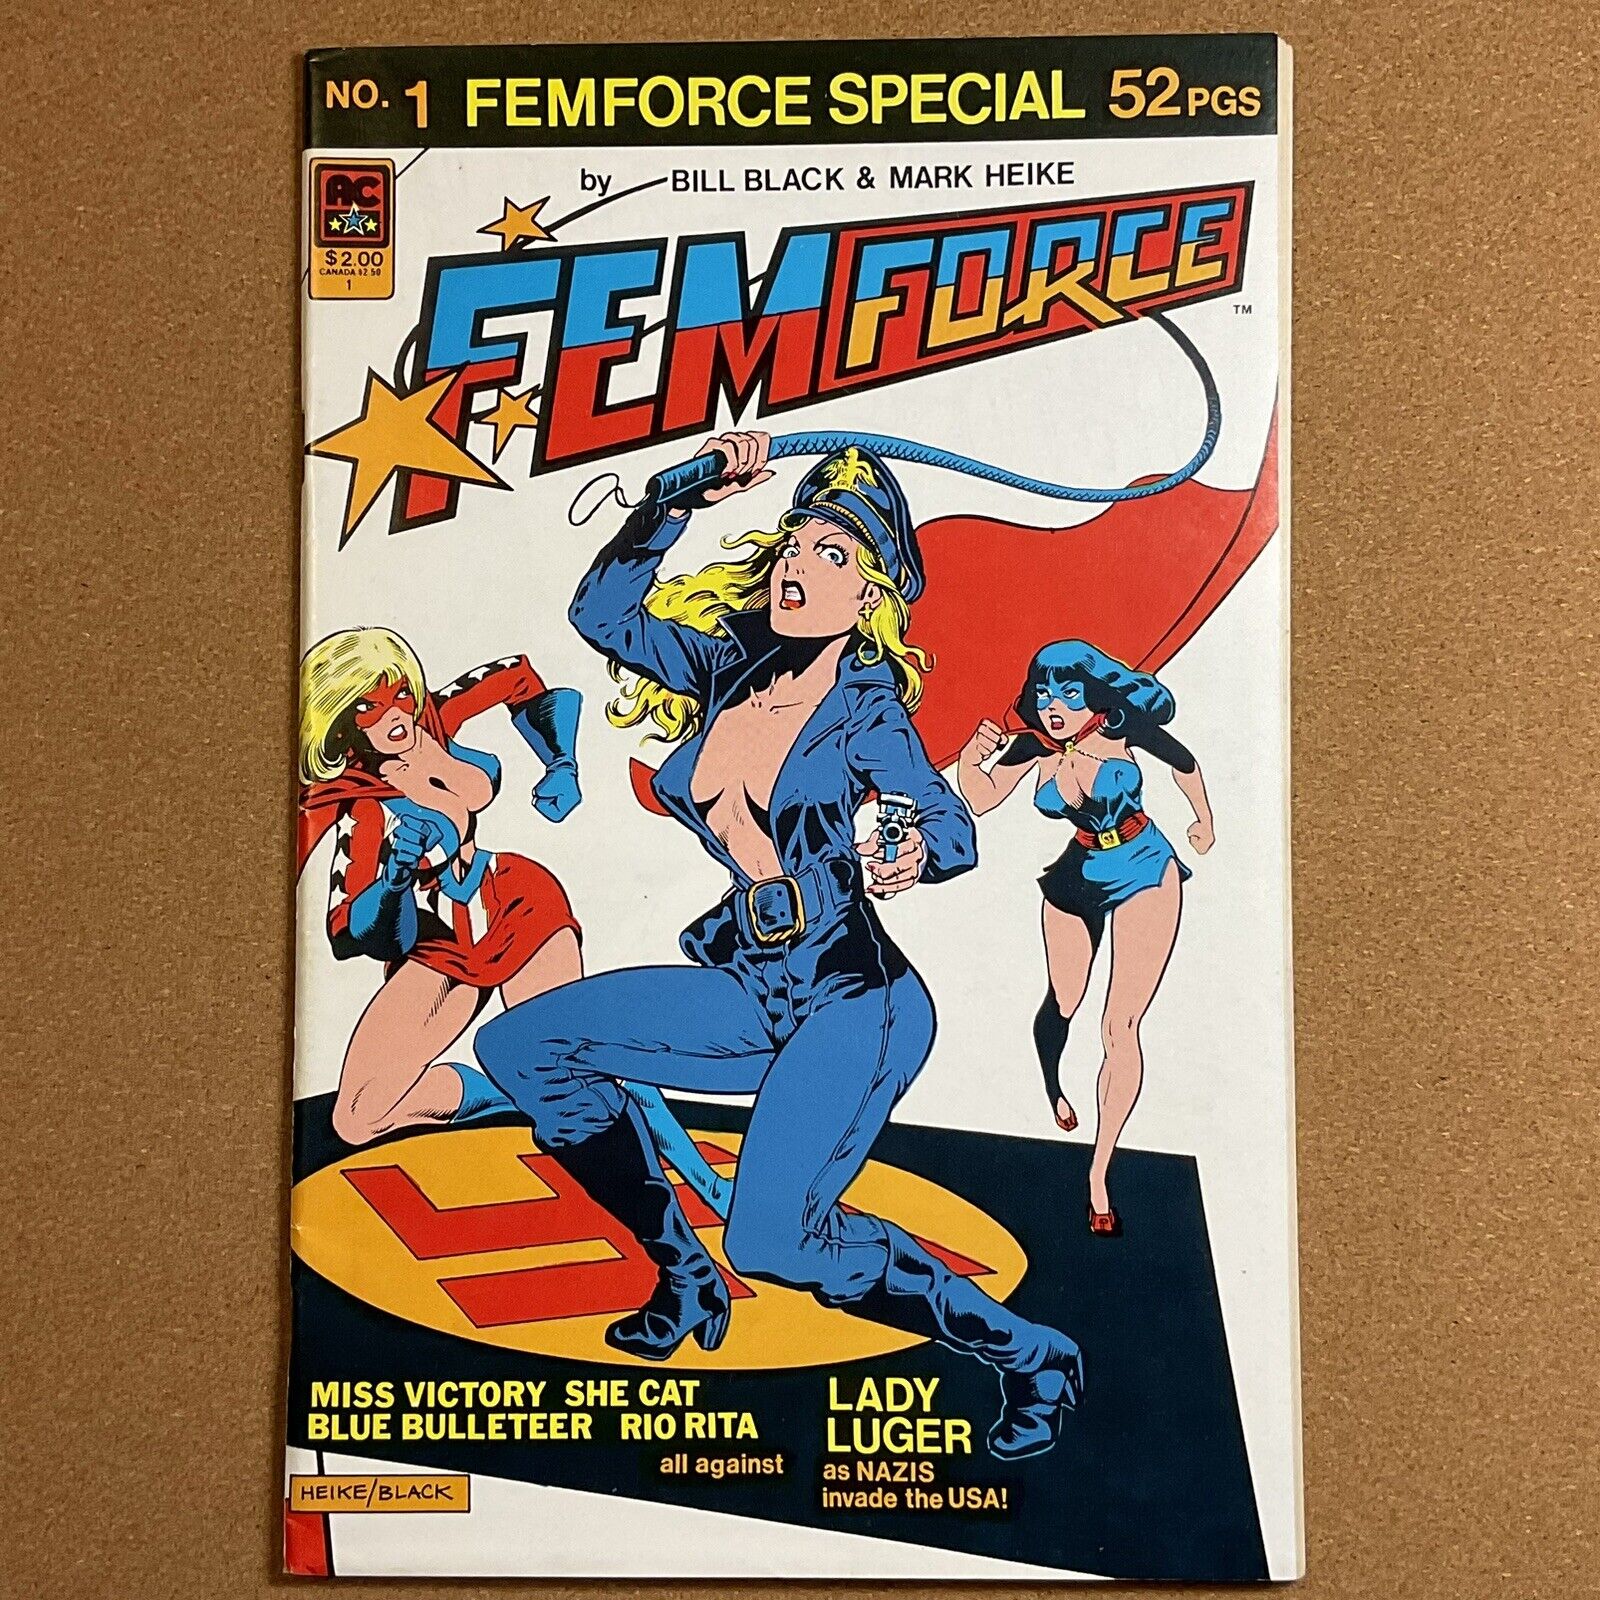 🔥 FEMFORCE SPECIAL #1 - AC COMICS 1984, LADY LUGER, MISS VICTORY, GOOD GIRL ART